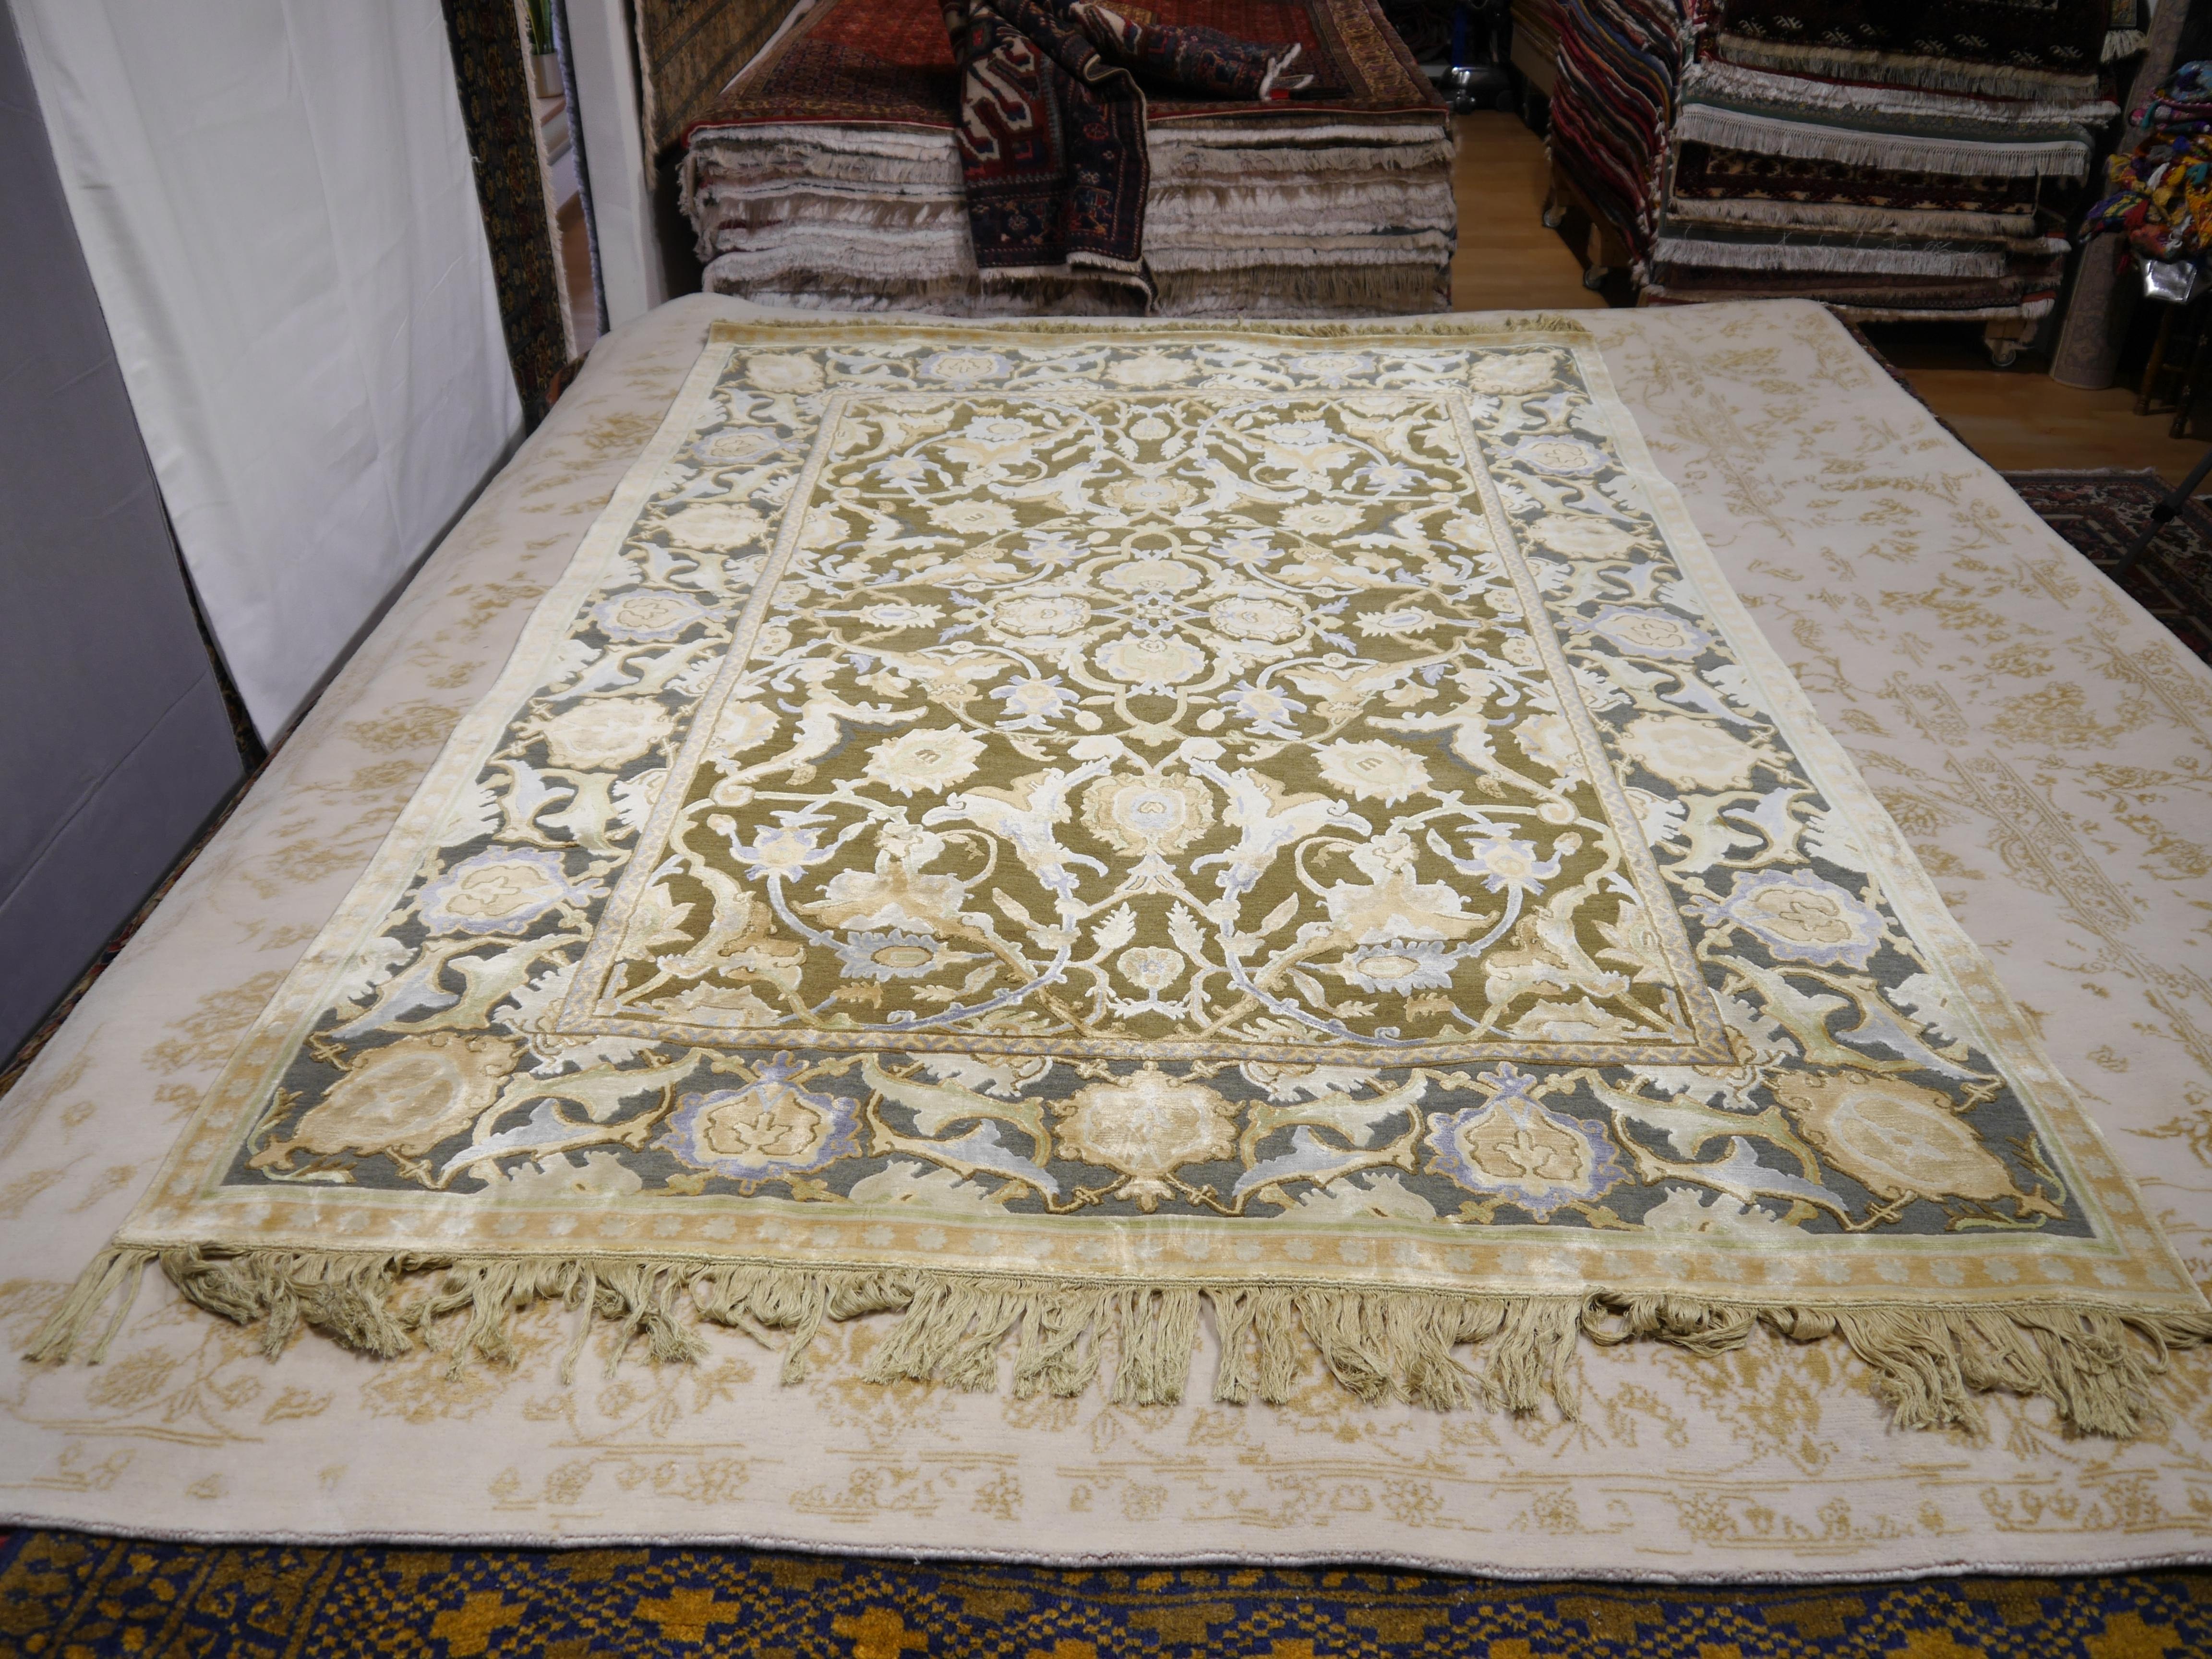 Nepalese New Polonaise Rug Silk and Wool Antique Isfahan Design Bespoke Sizes